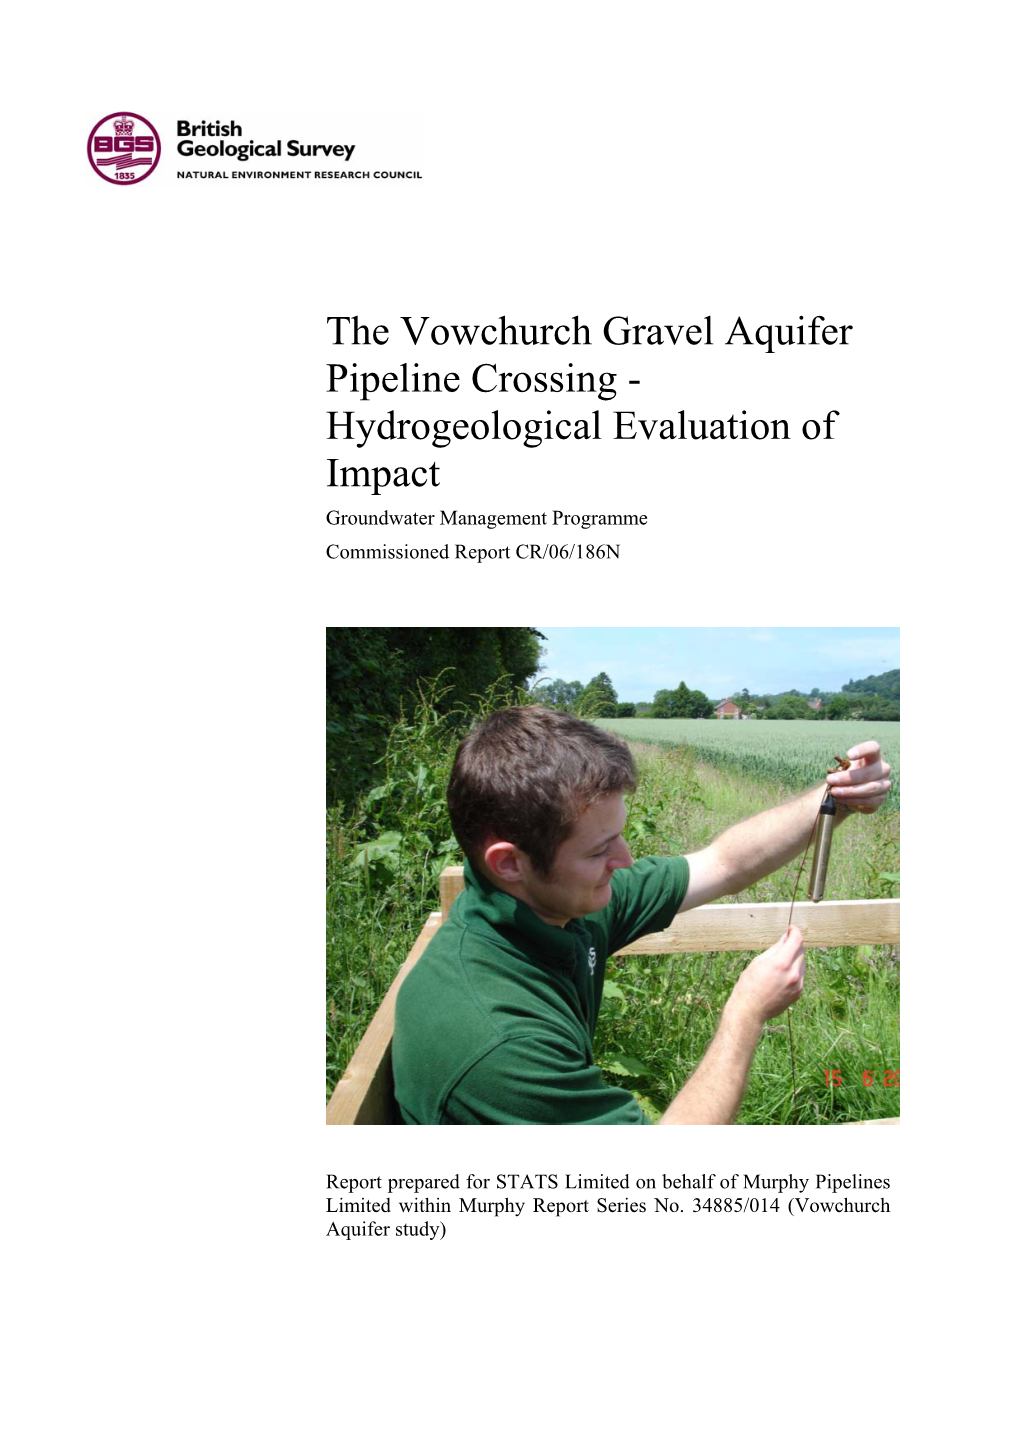 The Vowchurch Gravel Aquifer Pipeline Crossing - Hydrogeological Evaluation of Impact Groundwater Management Programme Commissioned Report CR/06/186N